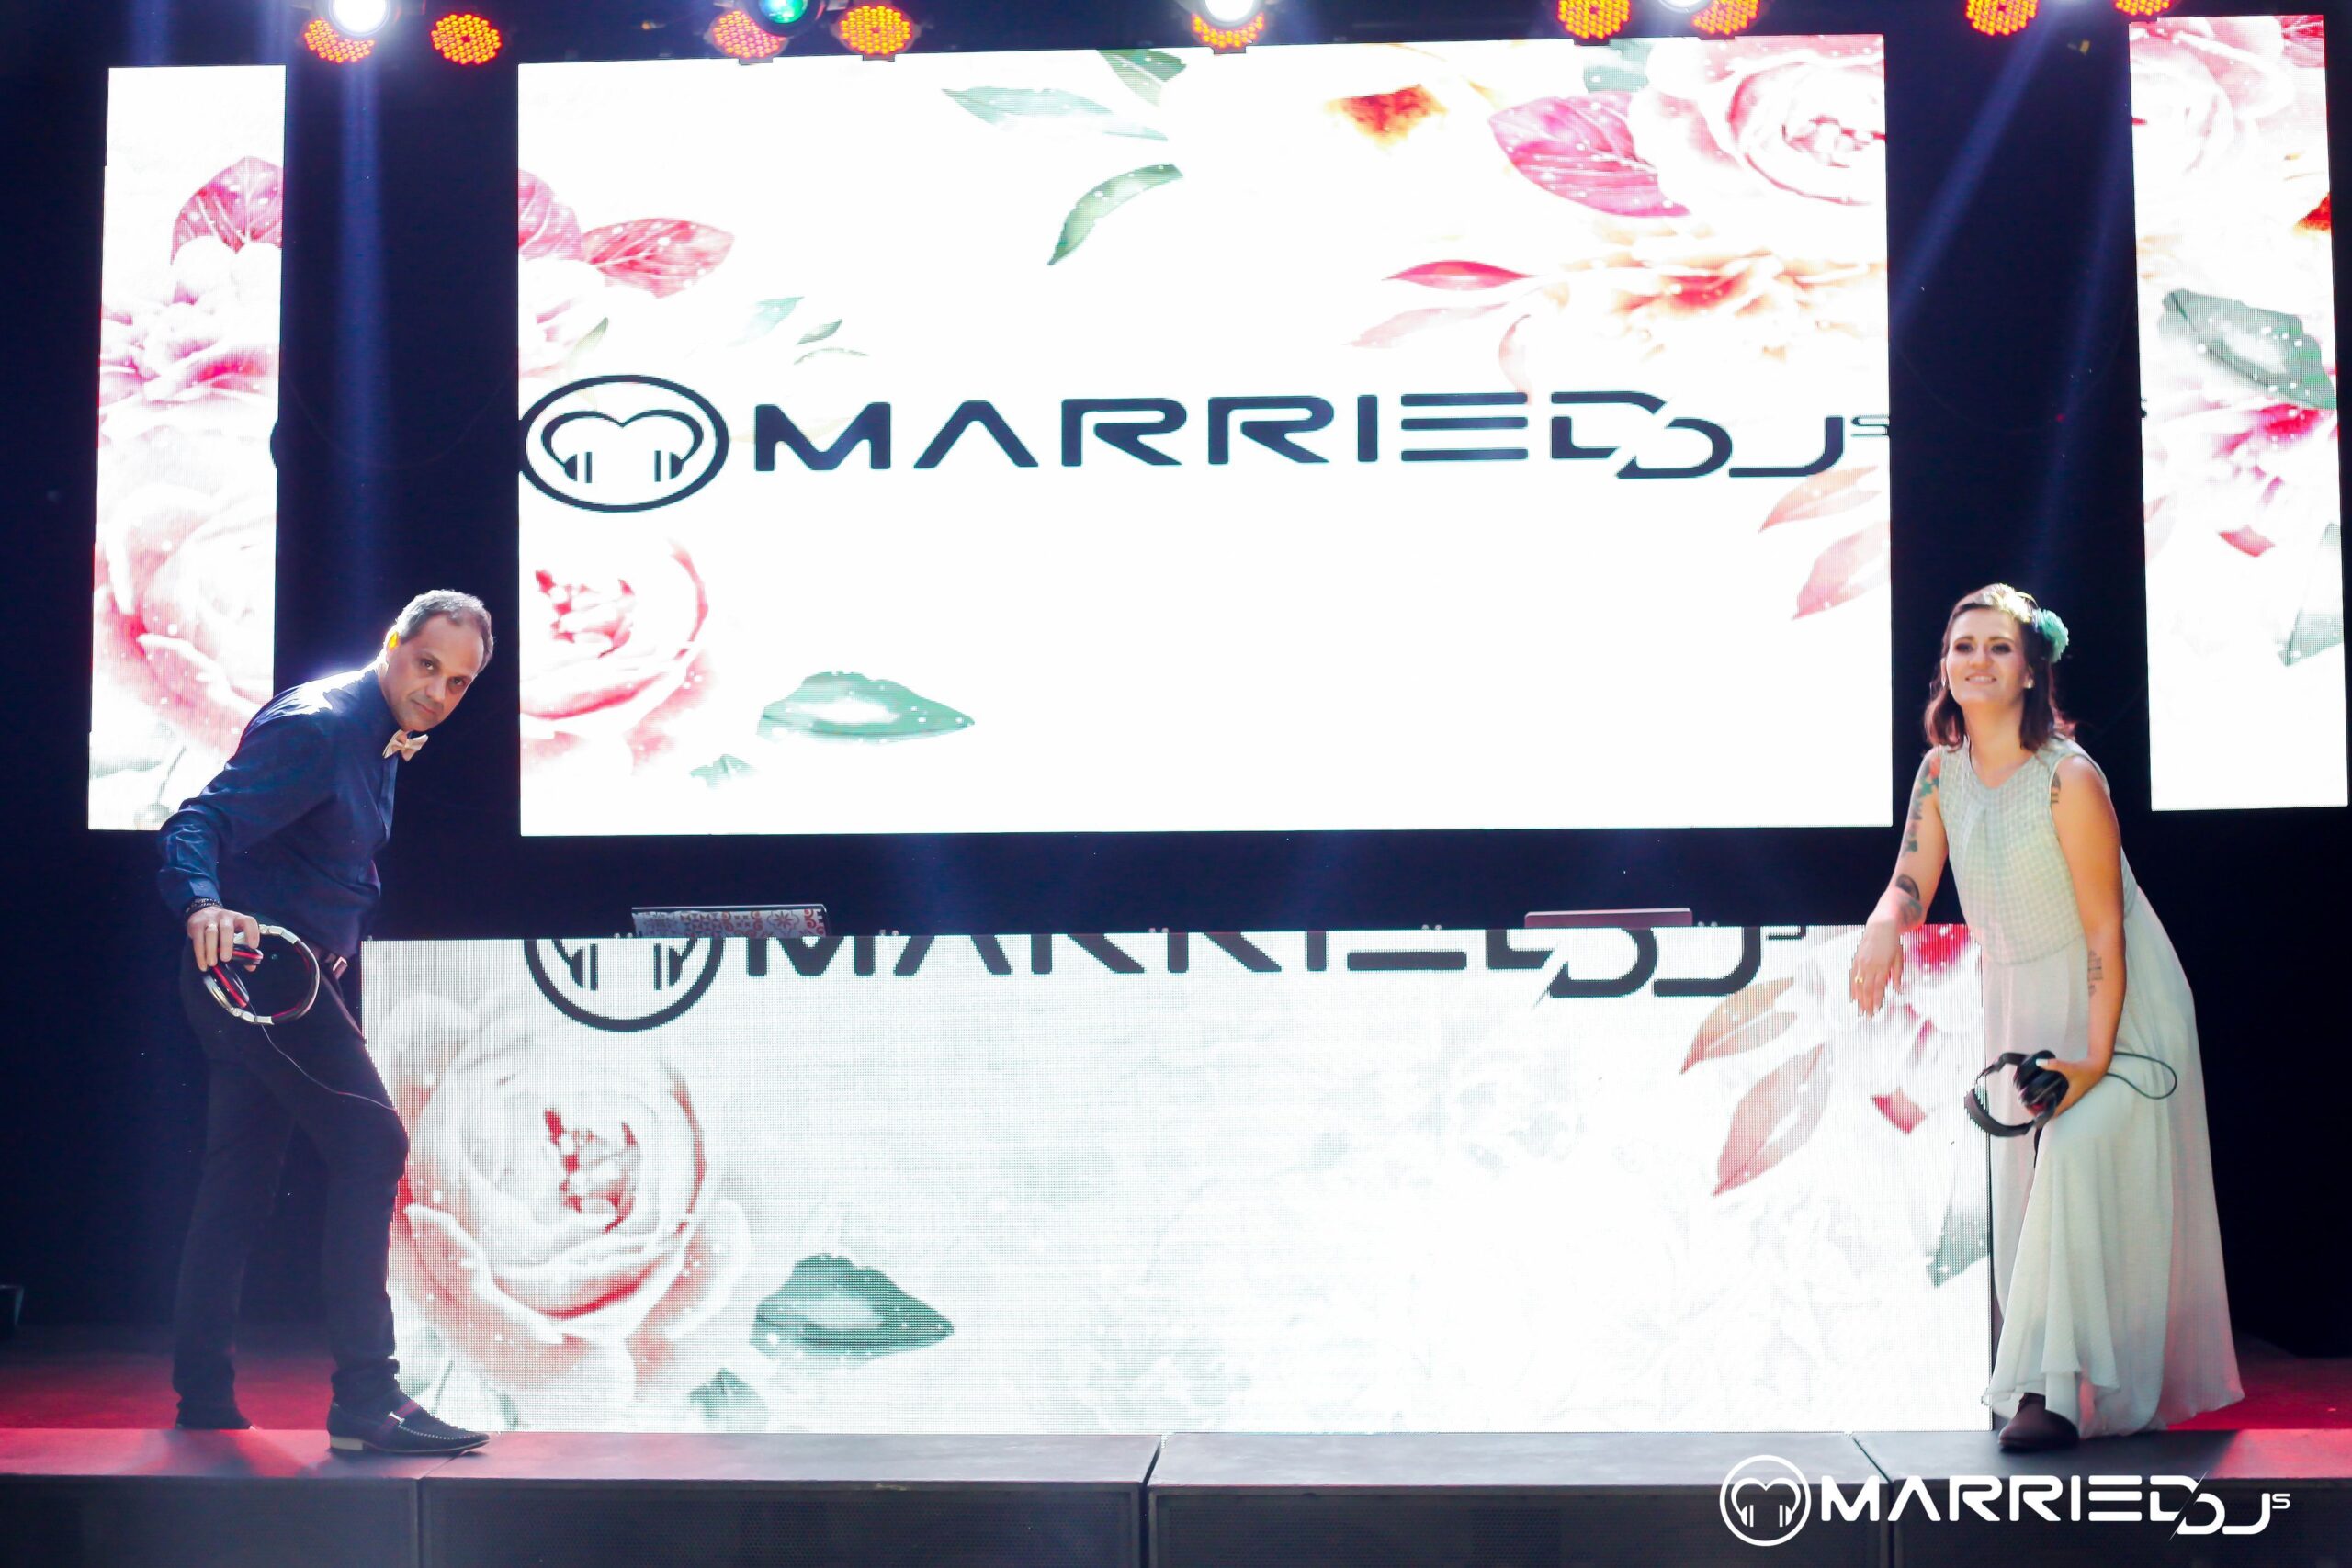 MARRIED DJS PAINEL LED